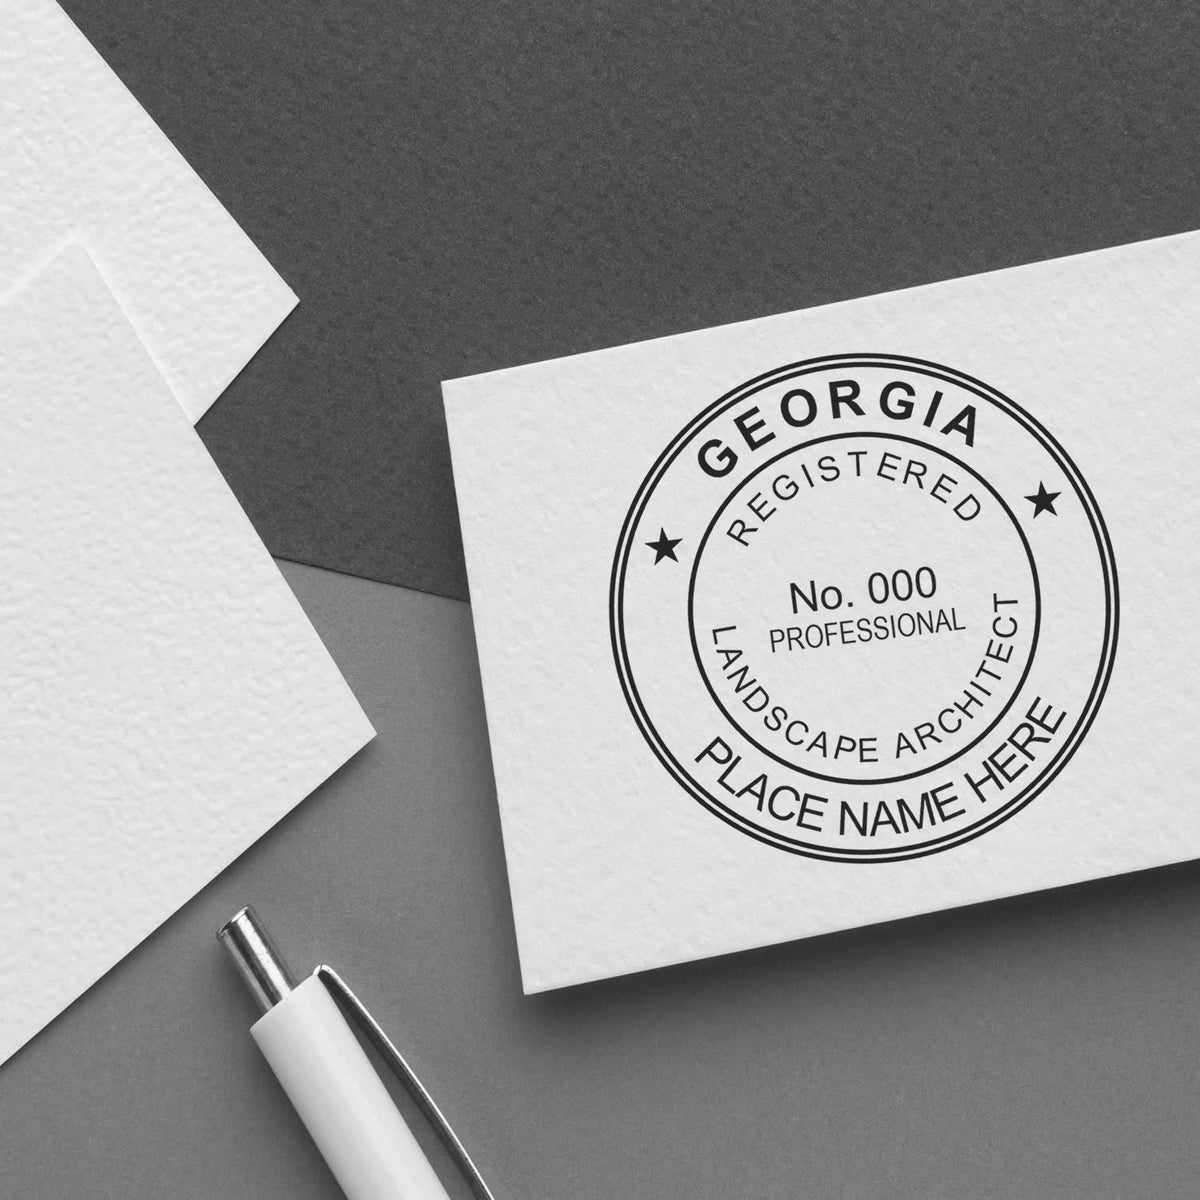 This paper is stamped with a sample imprint of the Slim Pre-Inked Georgia Landscape Architect Seal Stamp, signifying its quality and reliability.